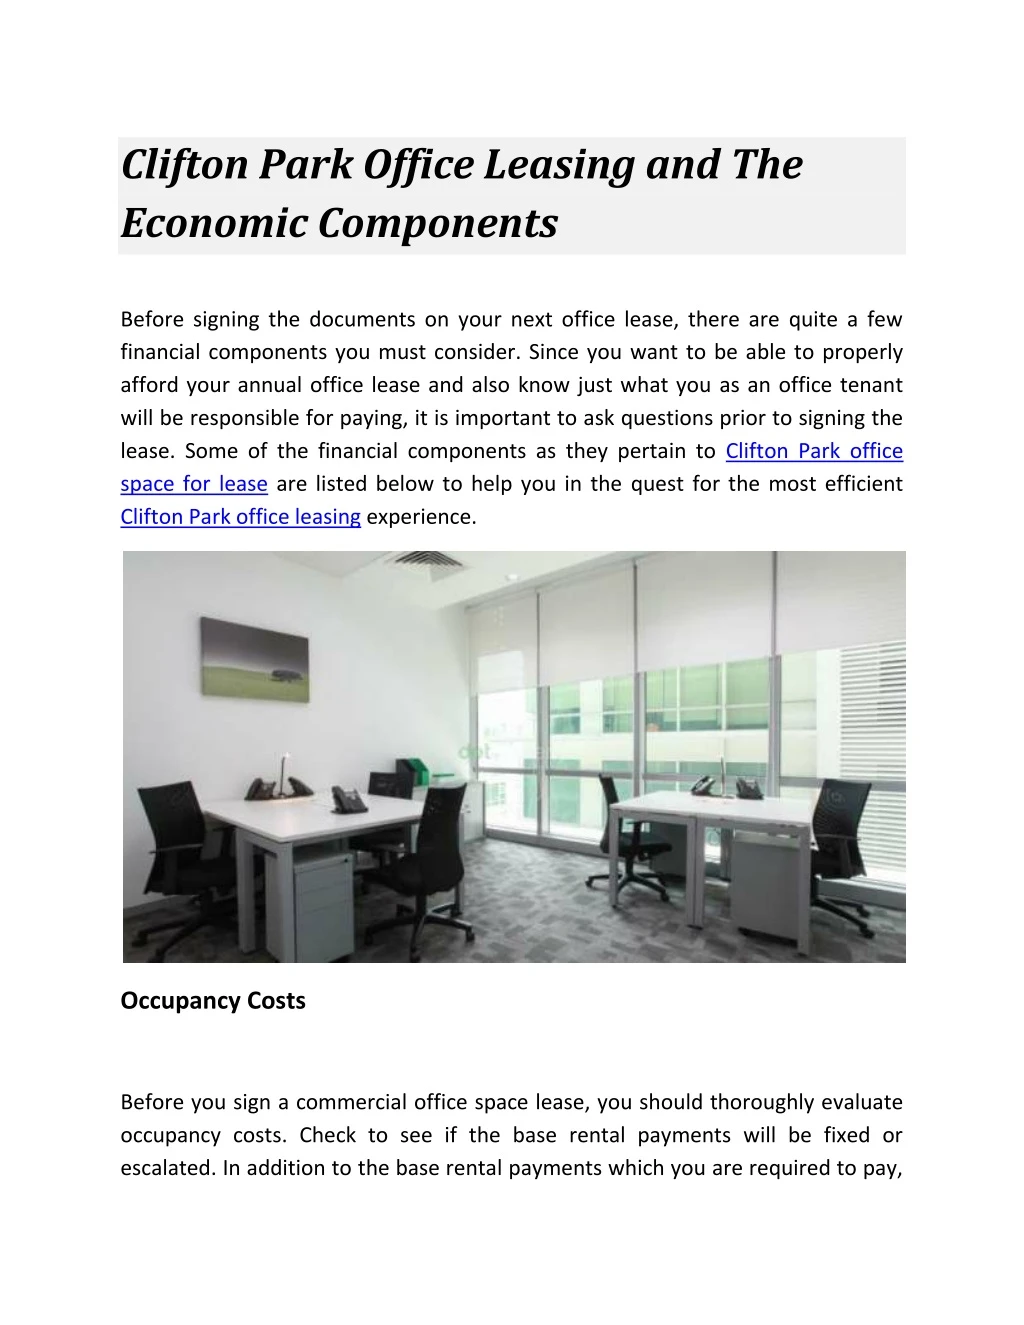 clifton park office leasing and the economic